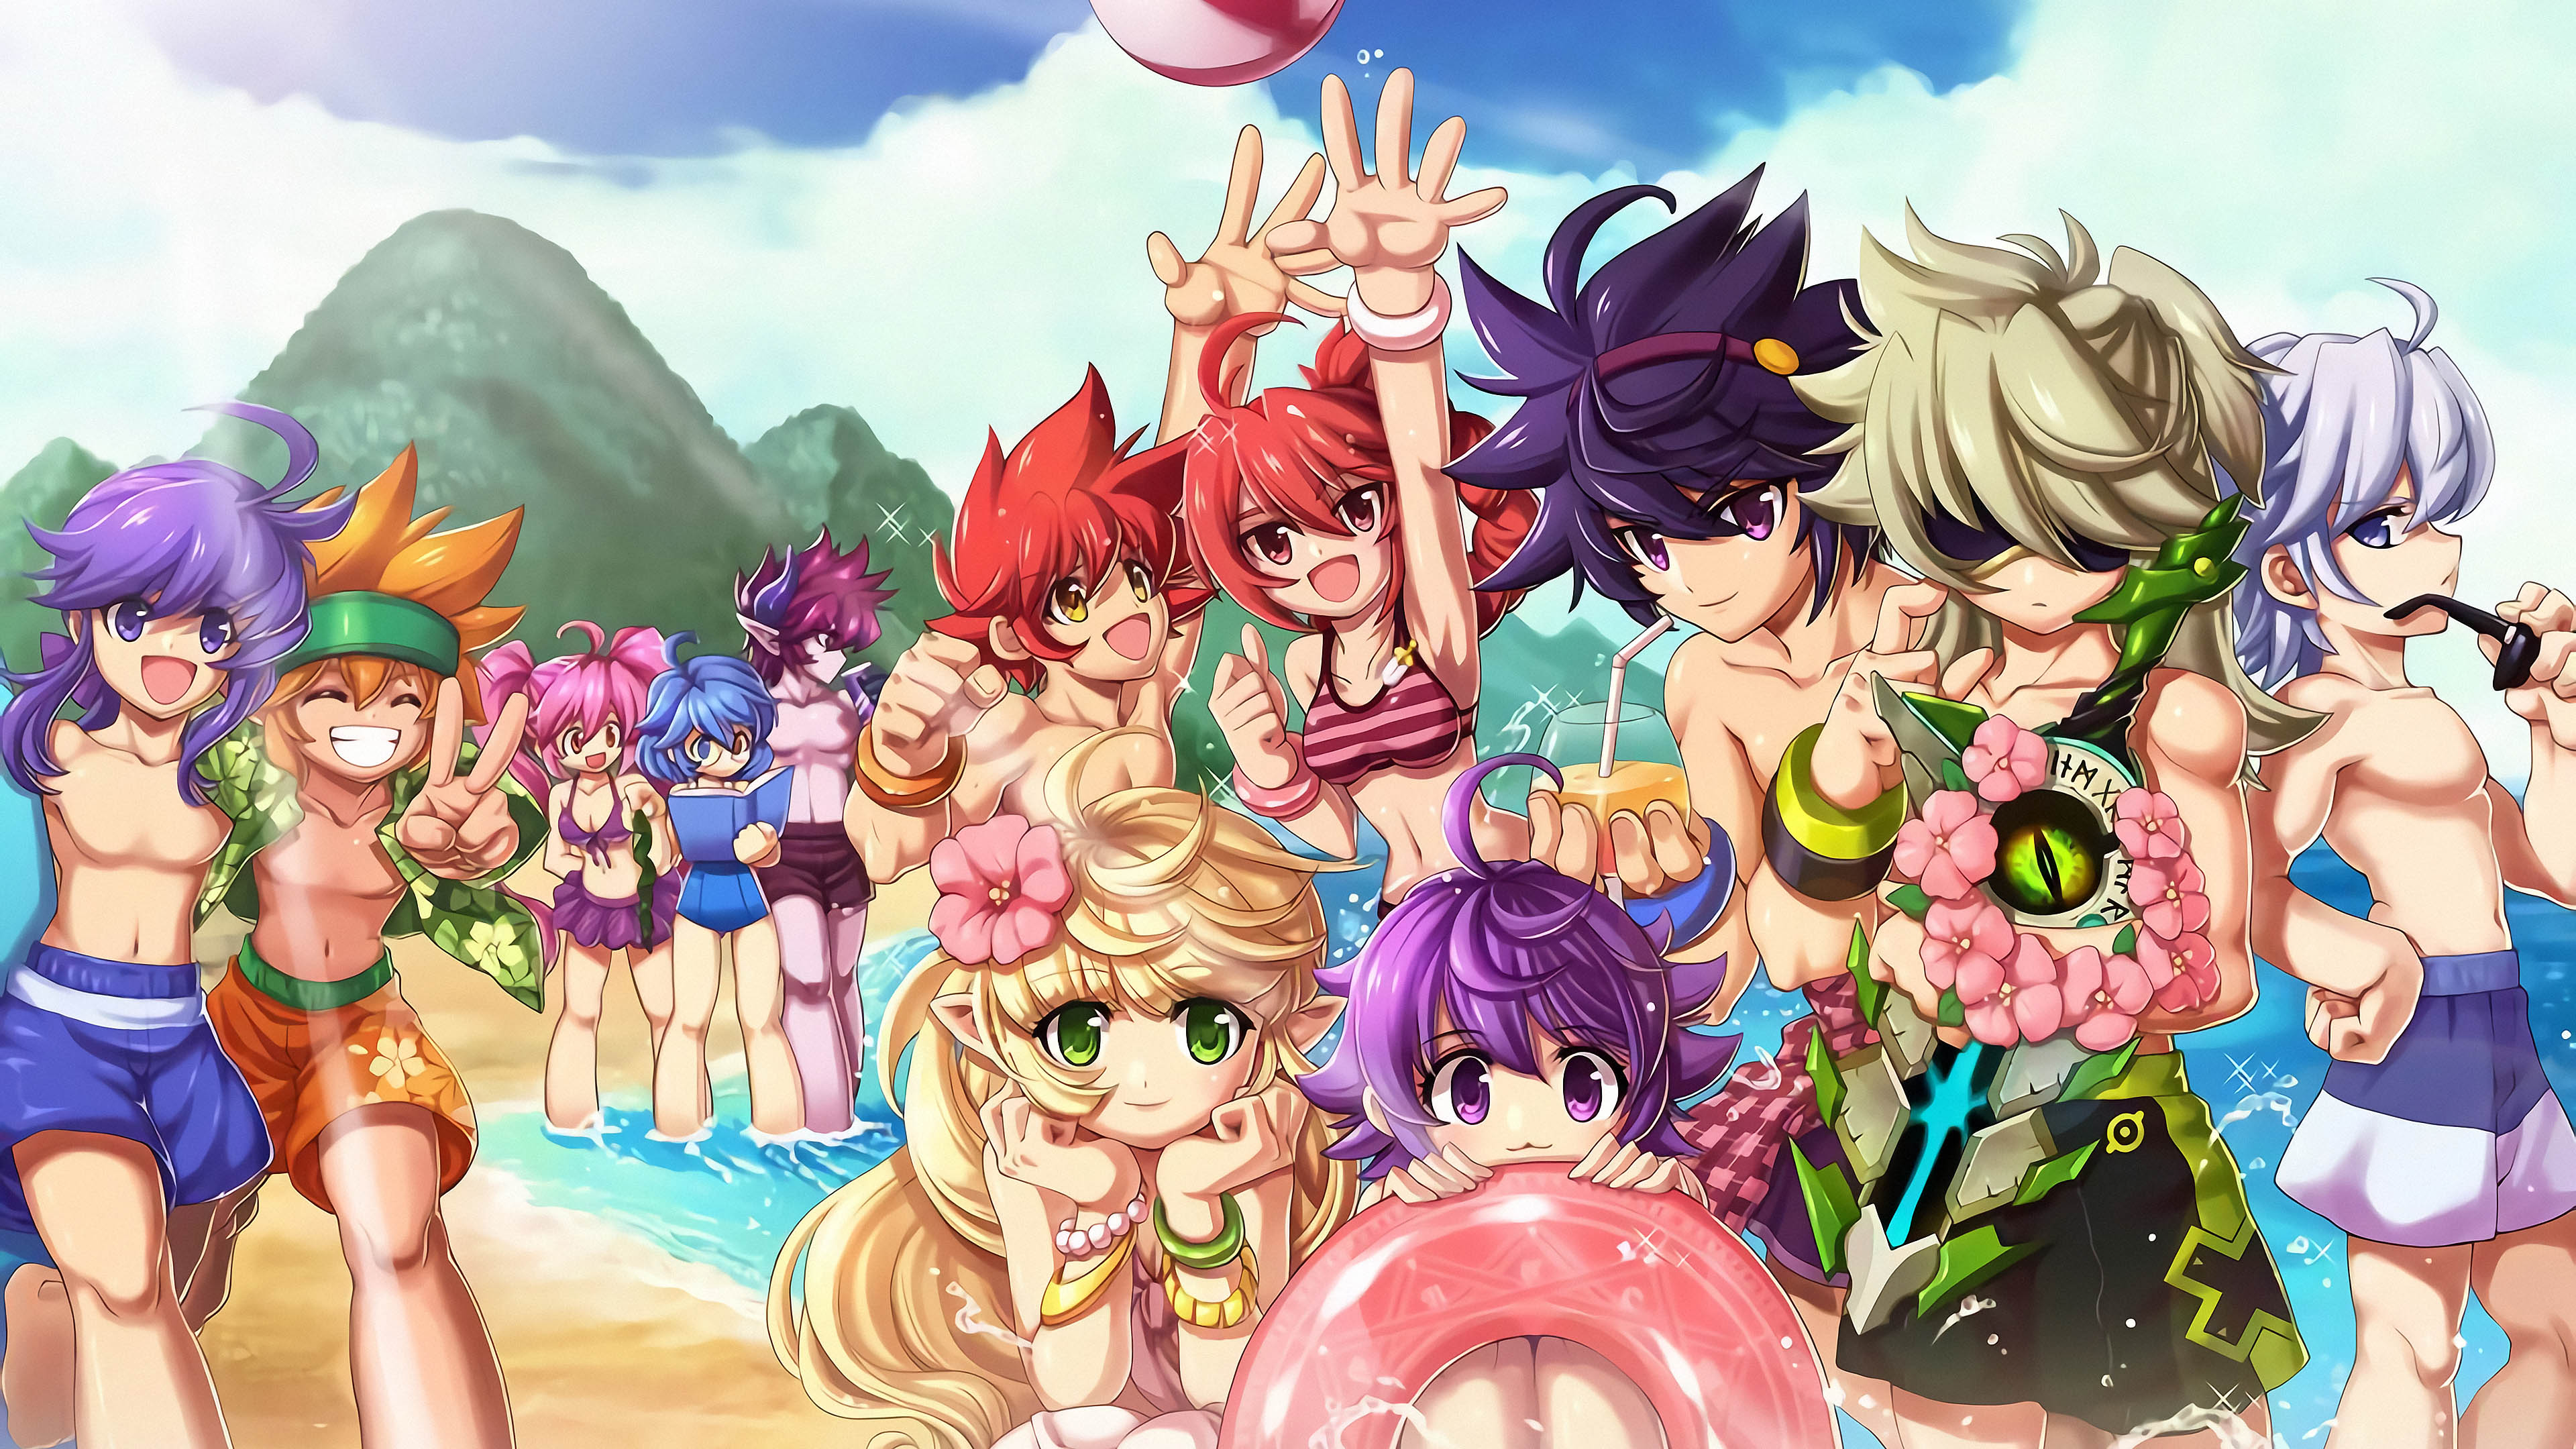 Anime 3840x2160 Grand Chase Grand Chase Classic 4K beach Lire (Grand Chase) Elesis (Grand Chase) Arme (Grand Chase) Sieghart (Grand Chase) Dio (Grand Chase) Ryan (Grand Chase) Ronan (Grand Chase) Amy (Grand Chase) Mari (Grand Chase) Lass (Grand Chase) Zero (Grand Chase) Jin (Grand Chase)